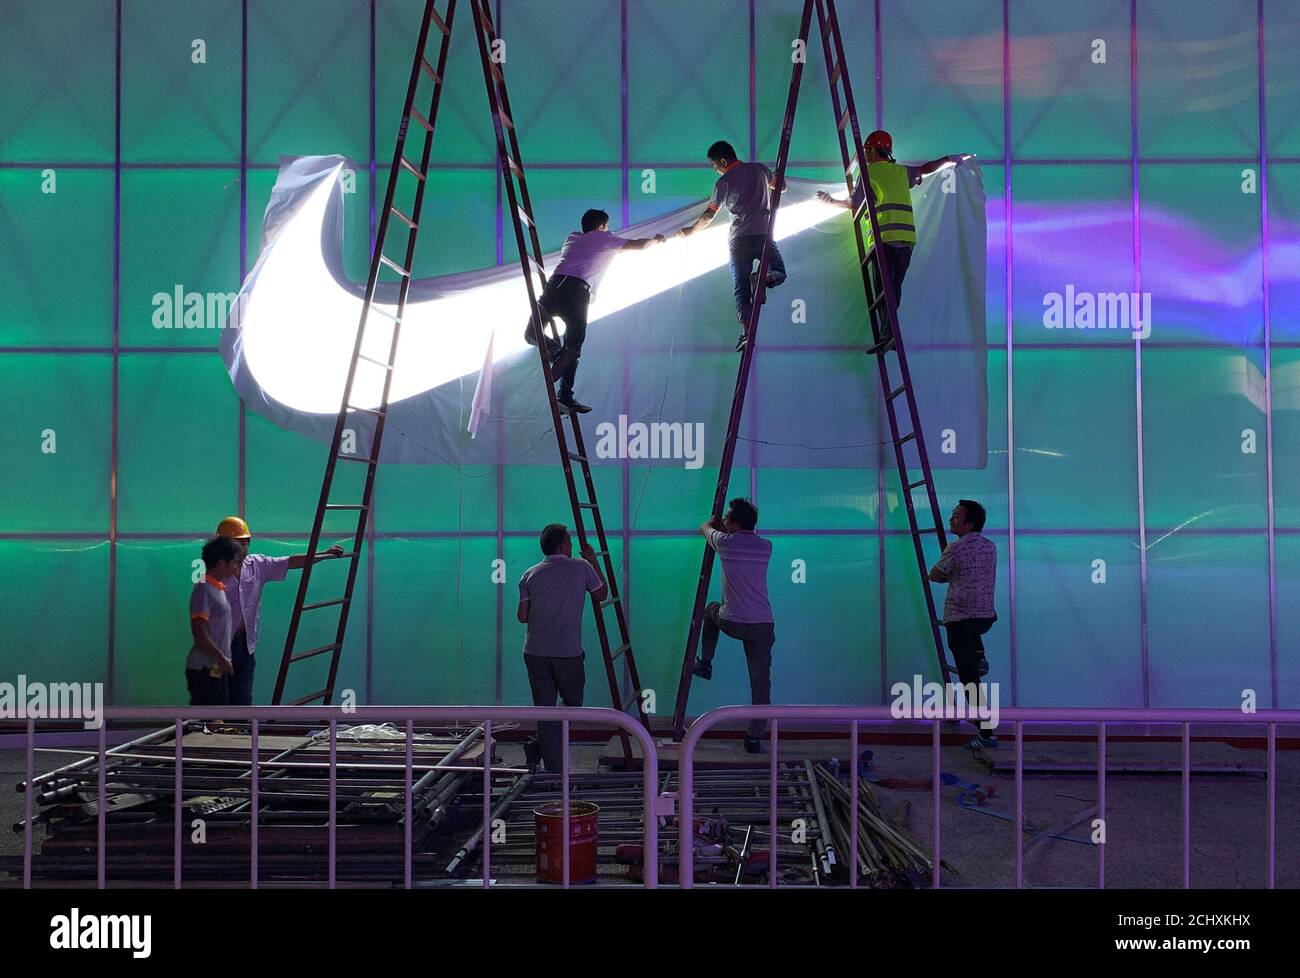 Workers install a Nike logo lamp outside the Wukesong Arena in Beijing,  China August 28, 2019. Picture taken August 28, 2019. REUTERS/Tingshu Wang  Stock Photo - Alamy